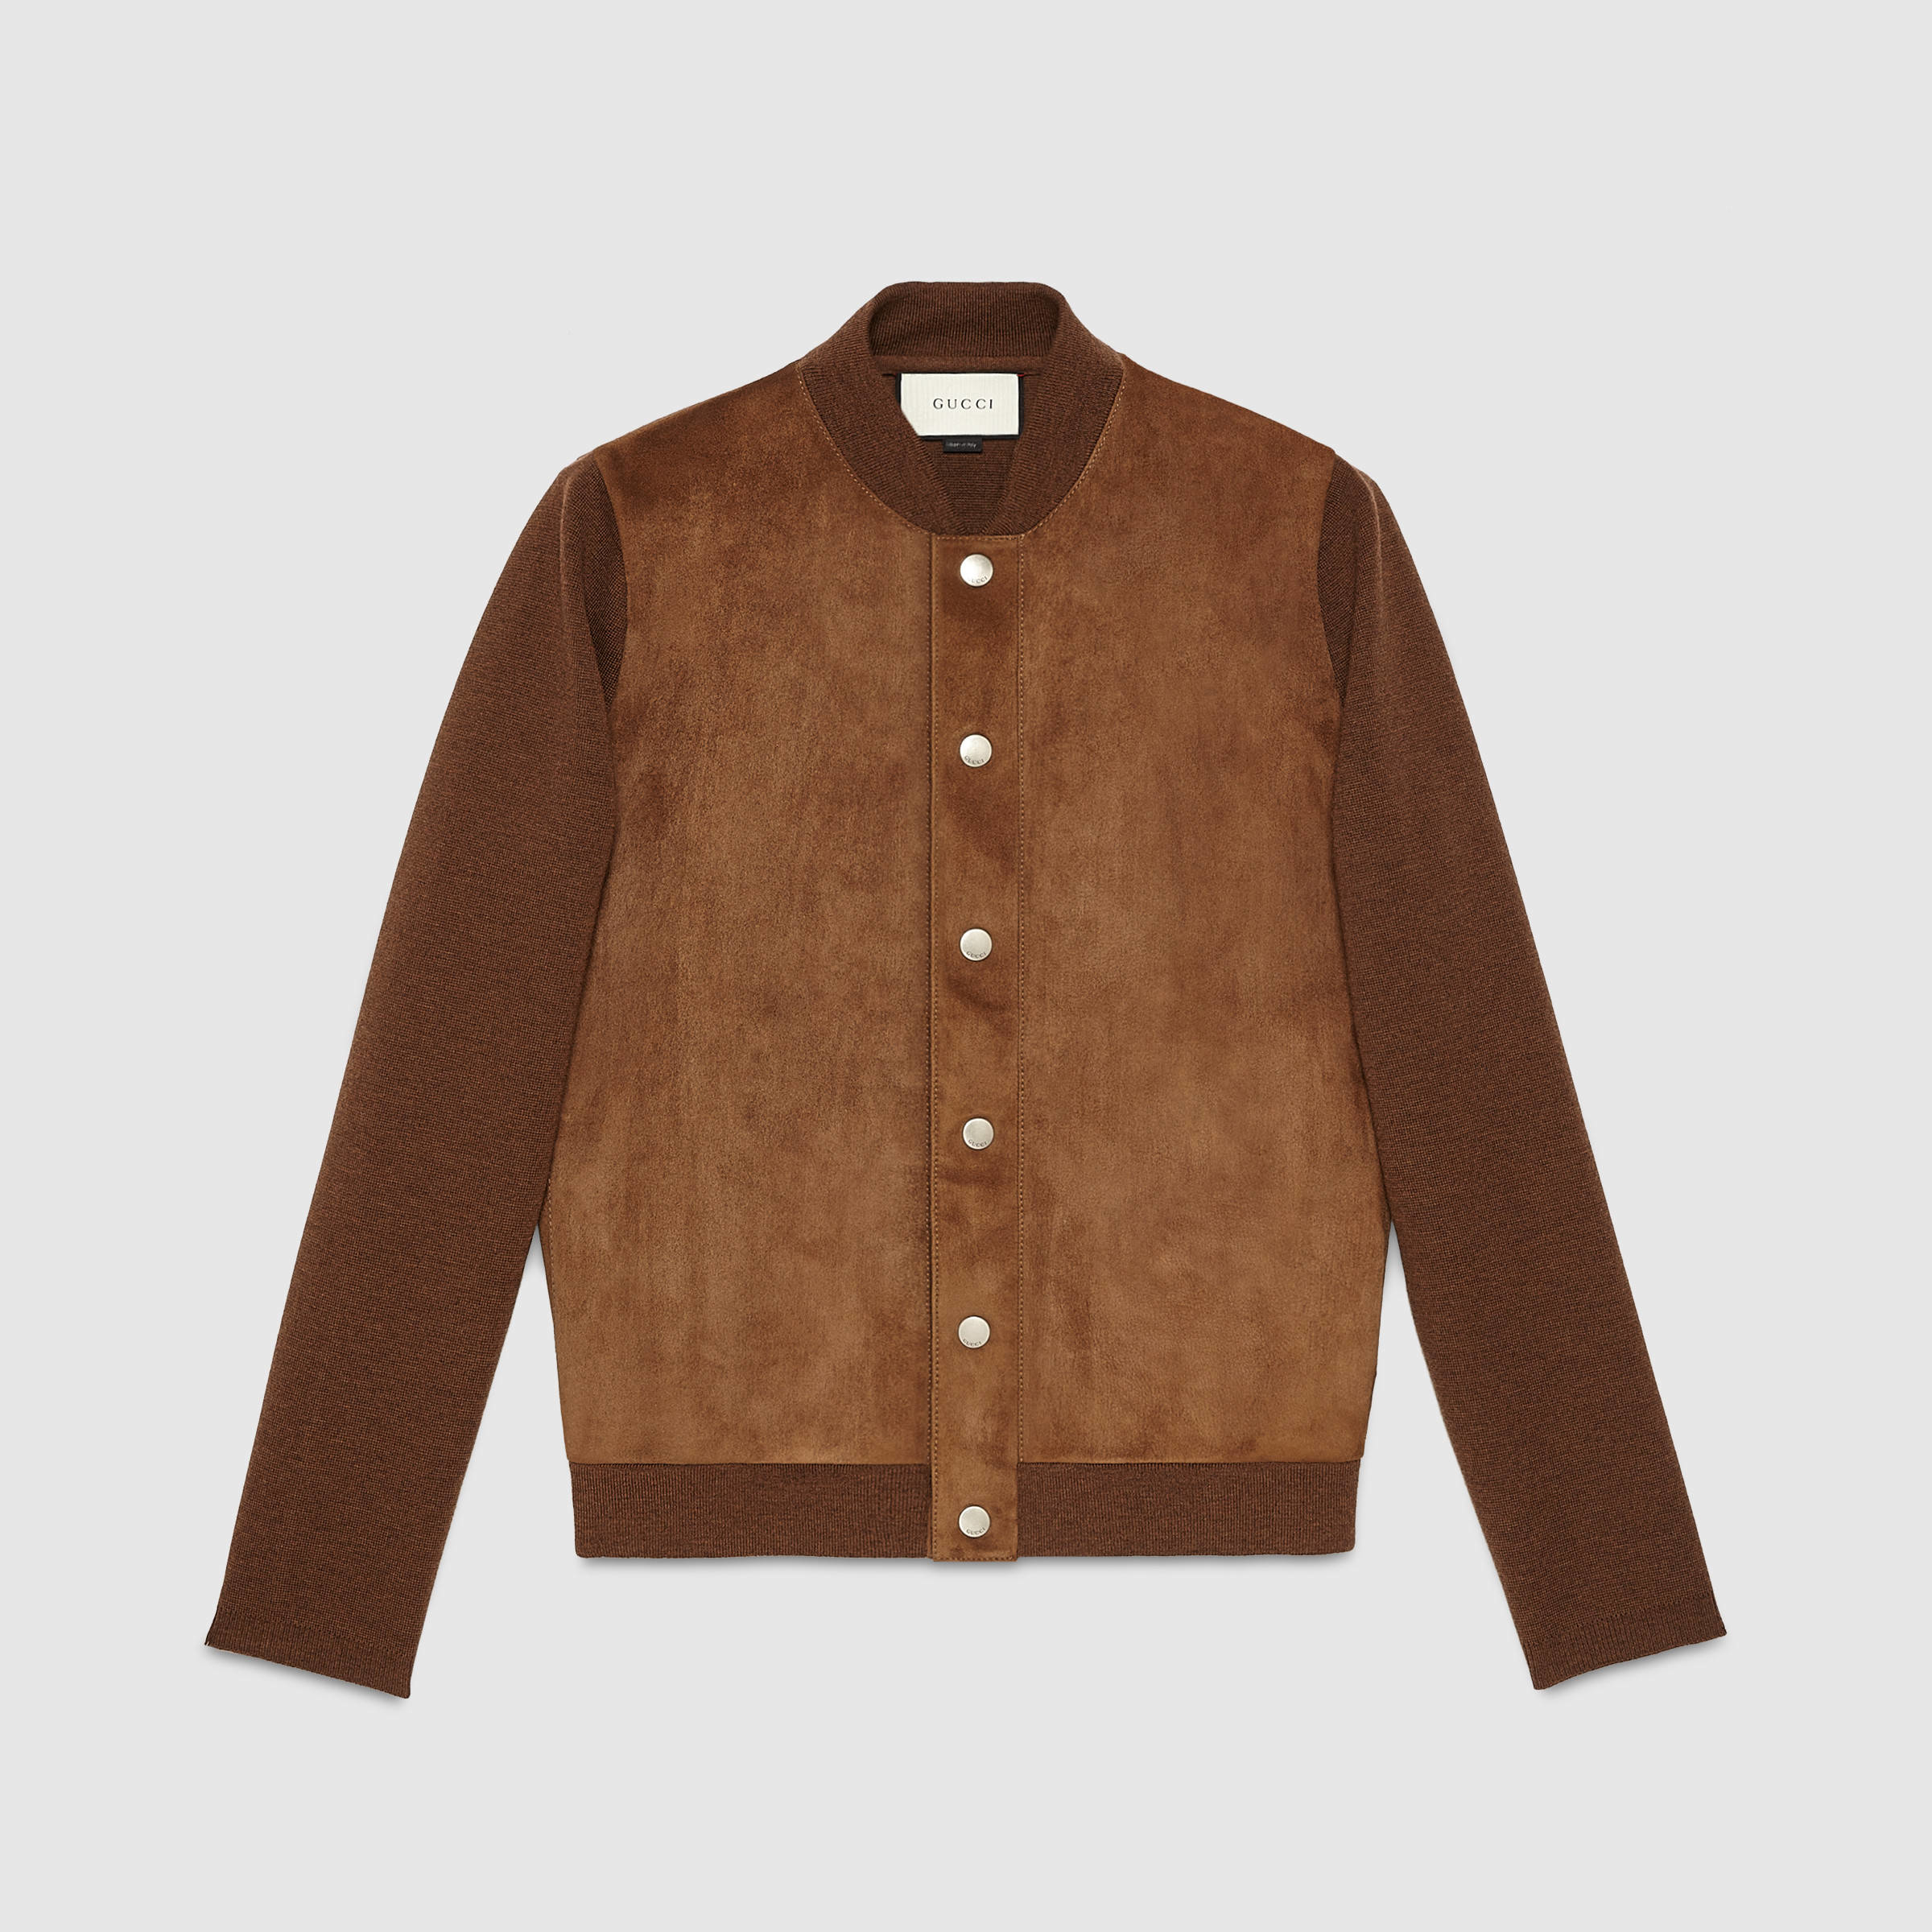 Gucci Wool Cardigan With Suede Front in Brown for Men - Lyst